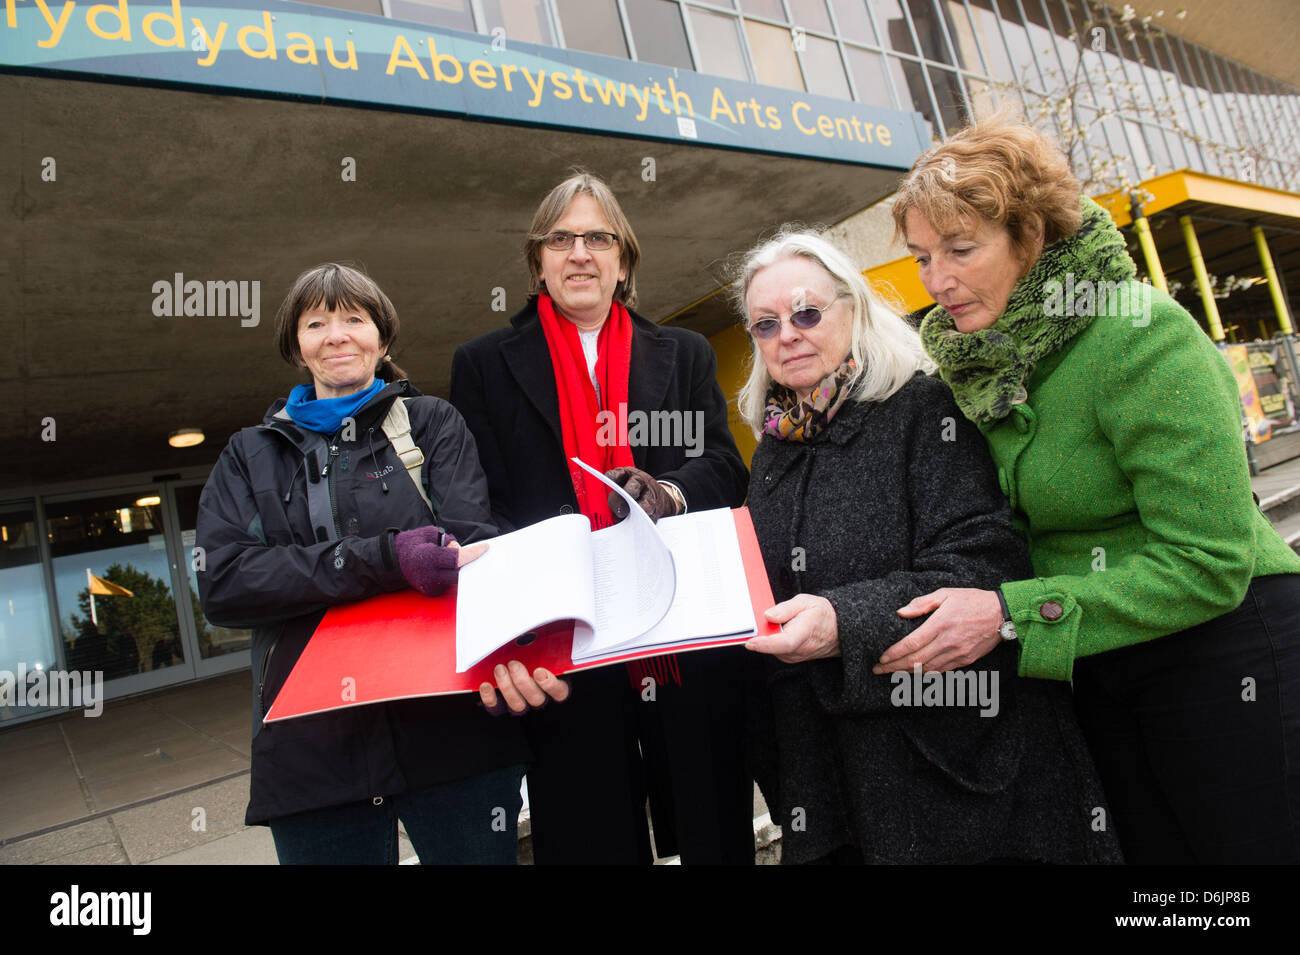 Aberystwyth, Wales, UK. April 19 2013.  L-R: LYNNE DICKENS, STEPHEN WEST, GILLIAN CLARKE, JANE LLOYD-FRANCIS}  Protesters unhappy with the suspension of two Aberystwyth Arts Centre's senior managers, present a petition signed by over 1,700 people to APRIL McMAHON, Principal of Aberystywyth University.  Local artists and other concerned members of the public fear that planned re-organisation within the University will lead to less public access to the internationally renowned centre  photo Credit: Keith Morris/Alamy Live News Stock Photo